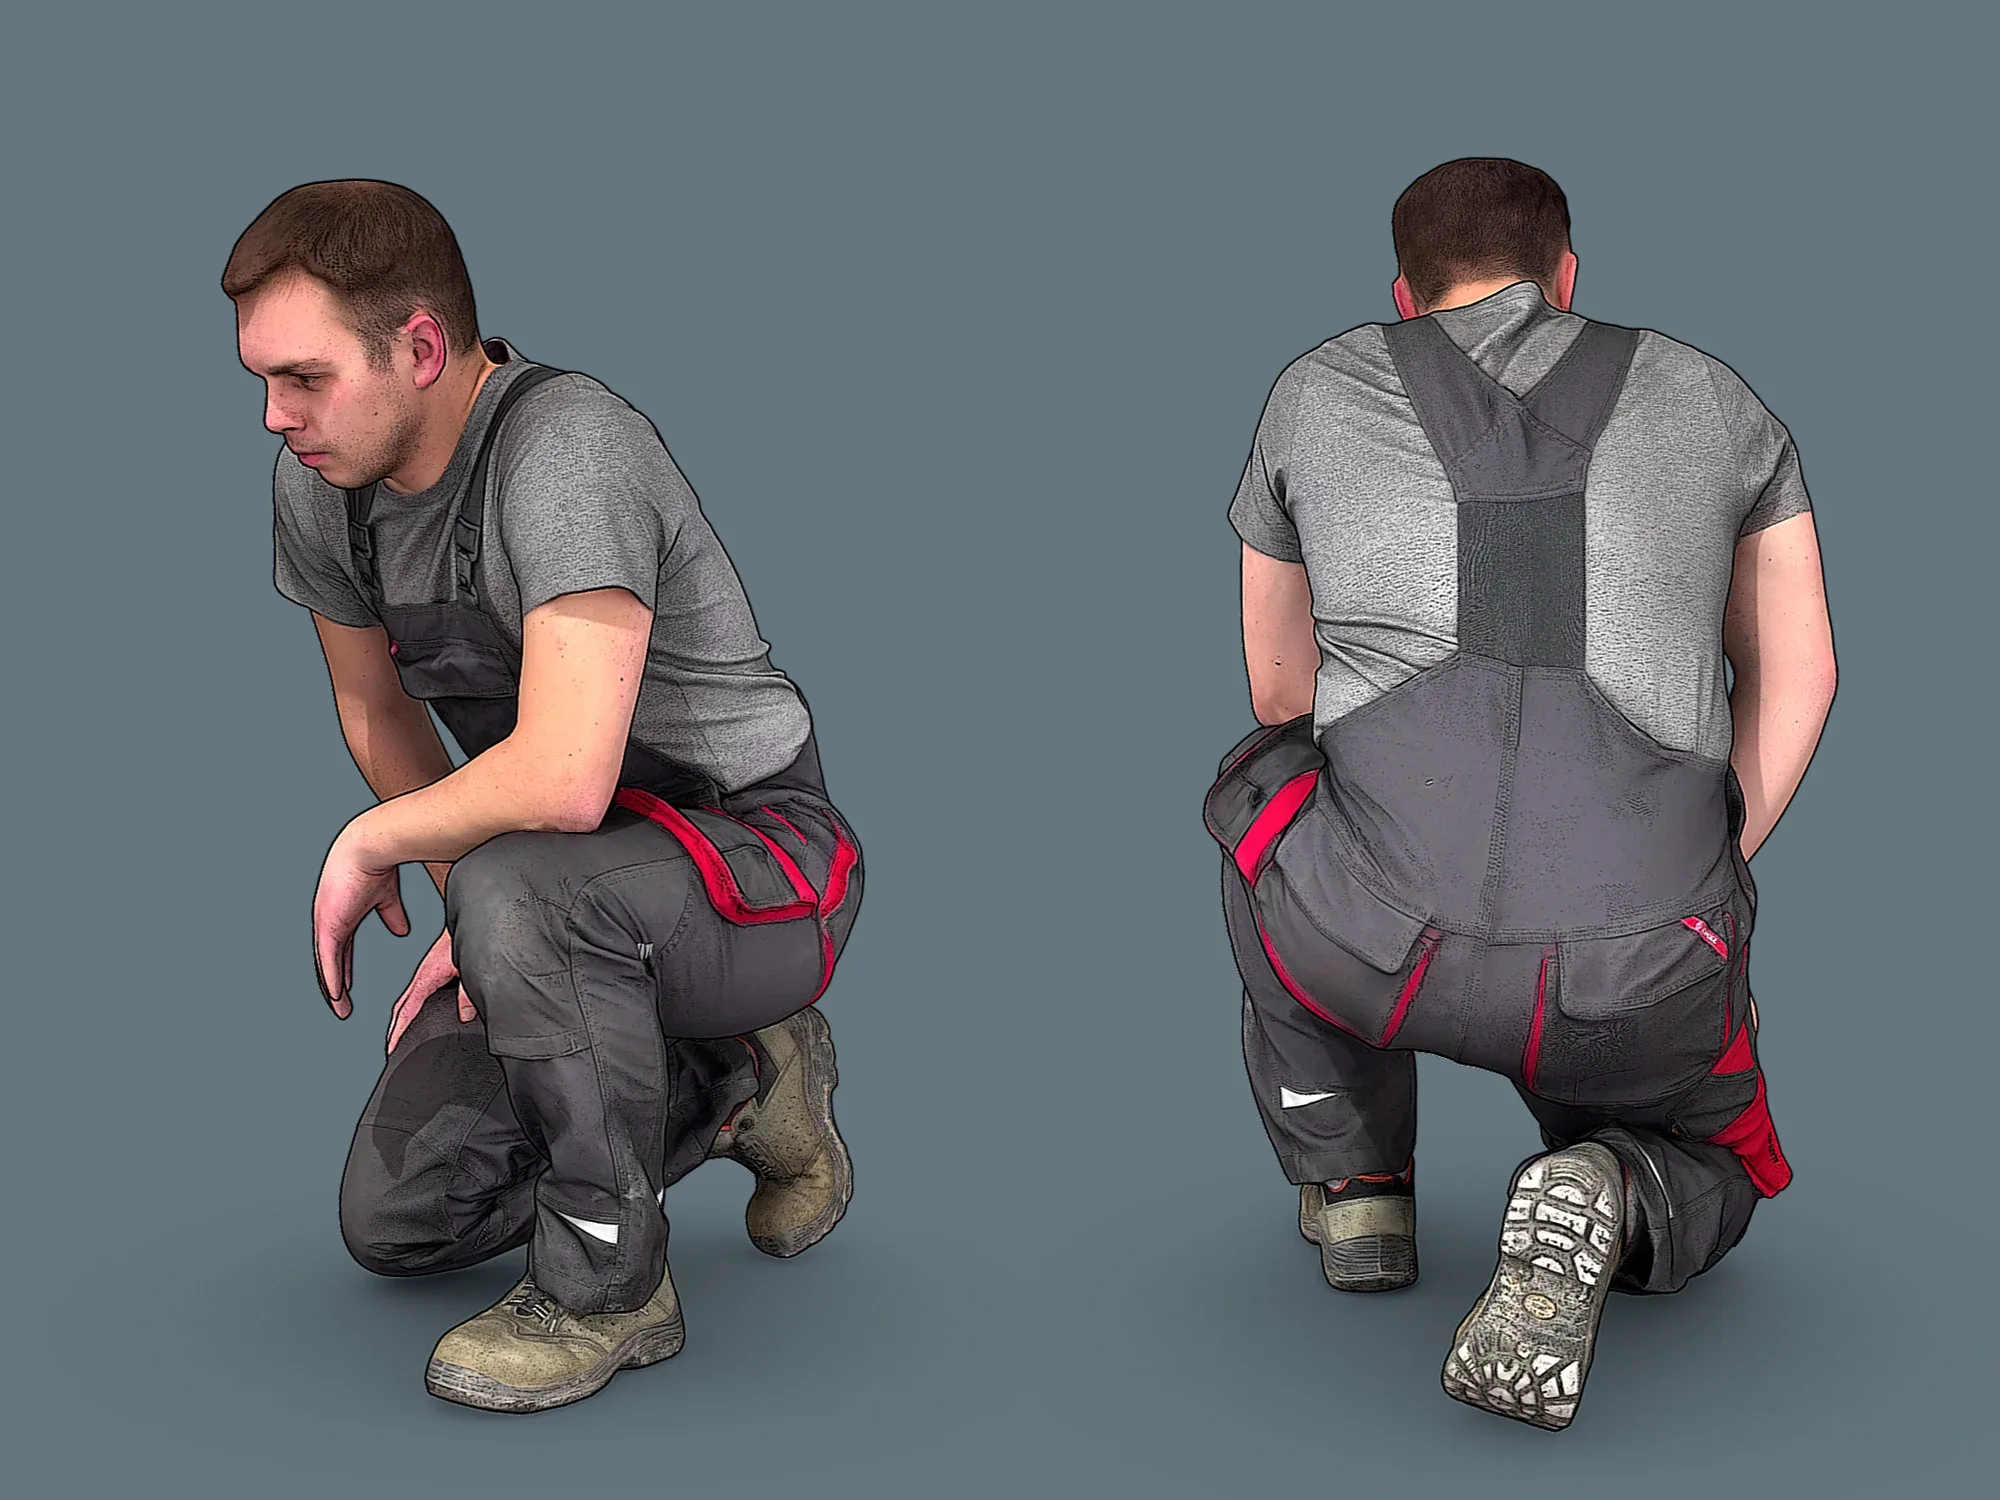 Foreman in Overalls model pack